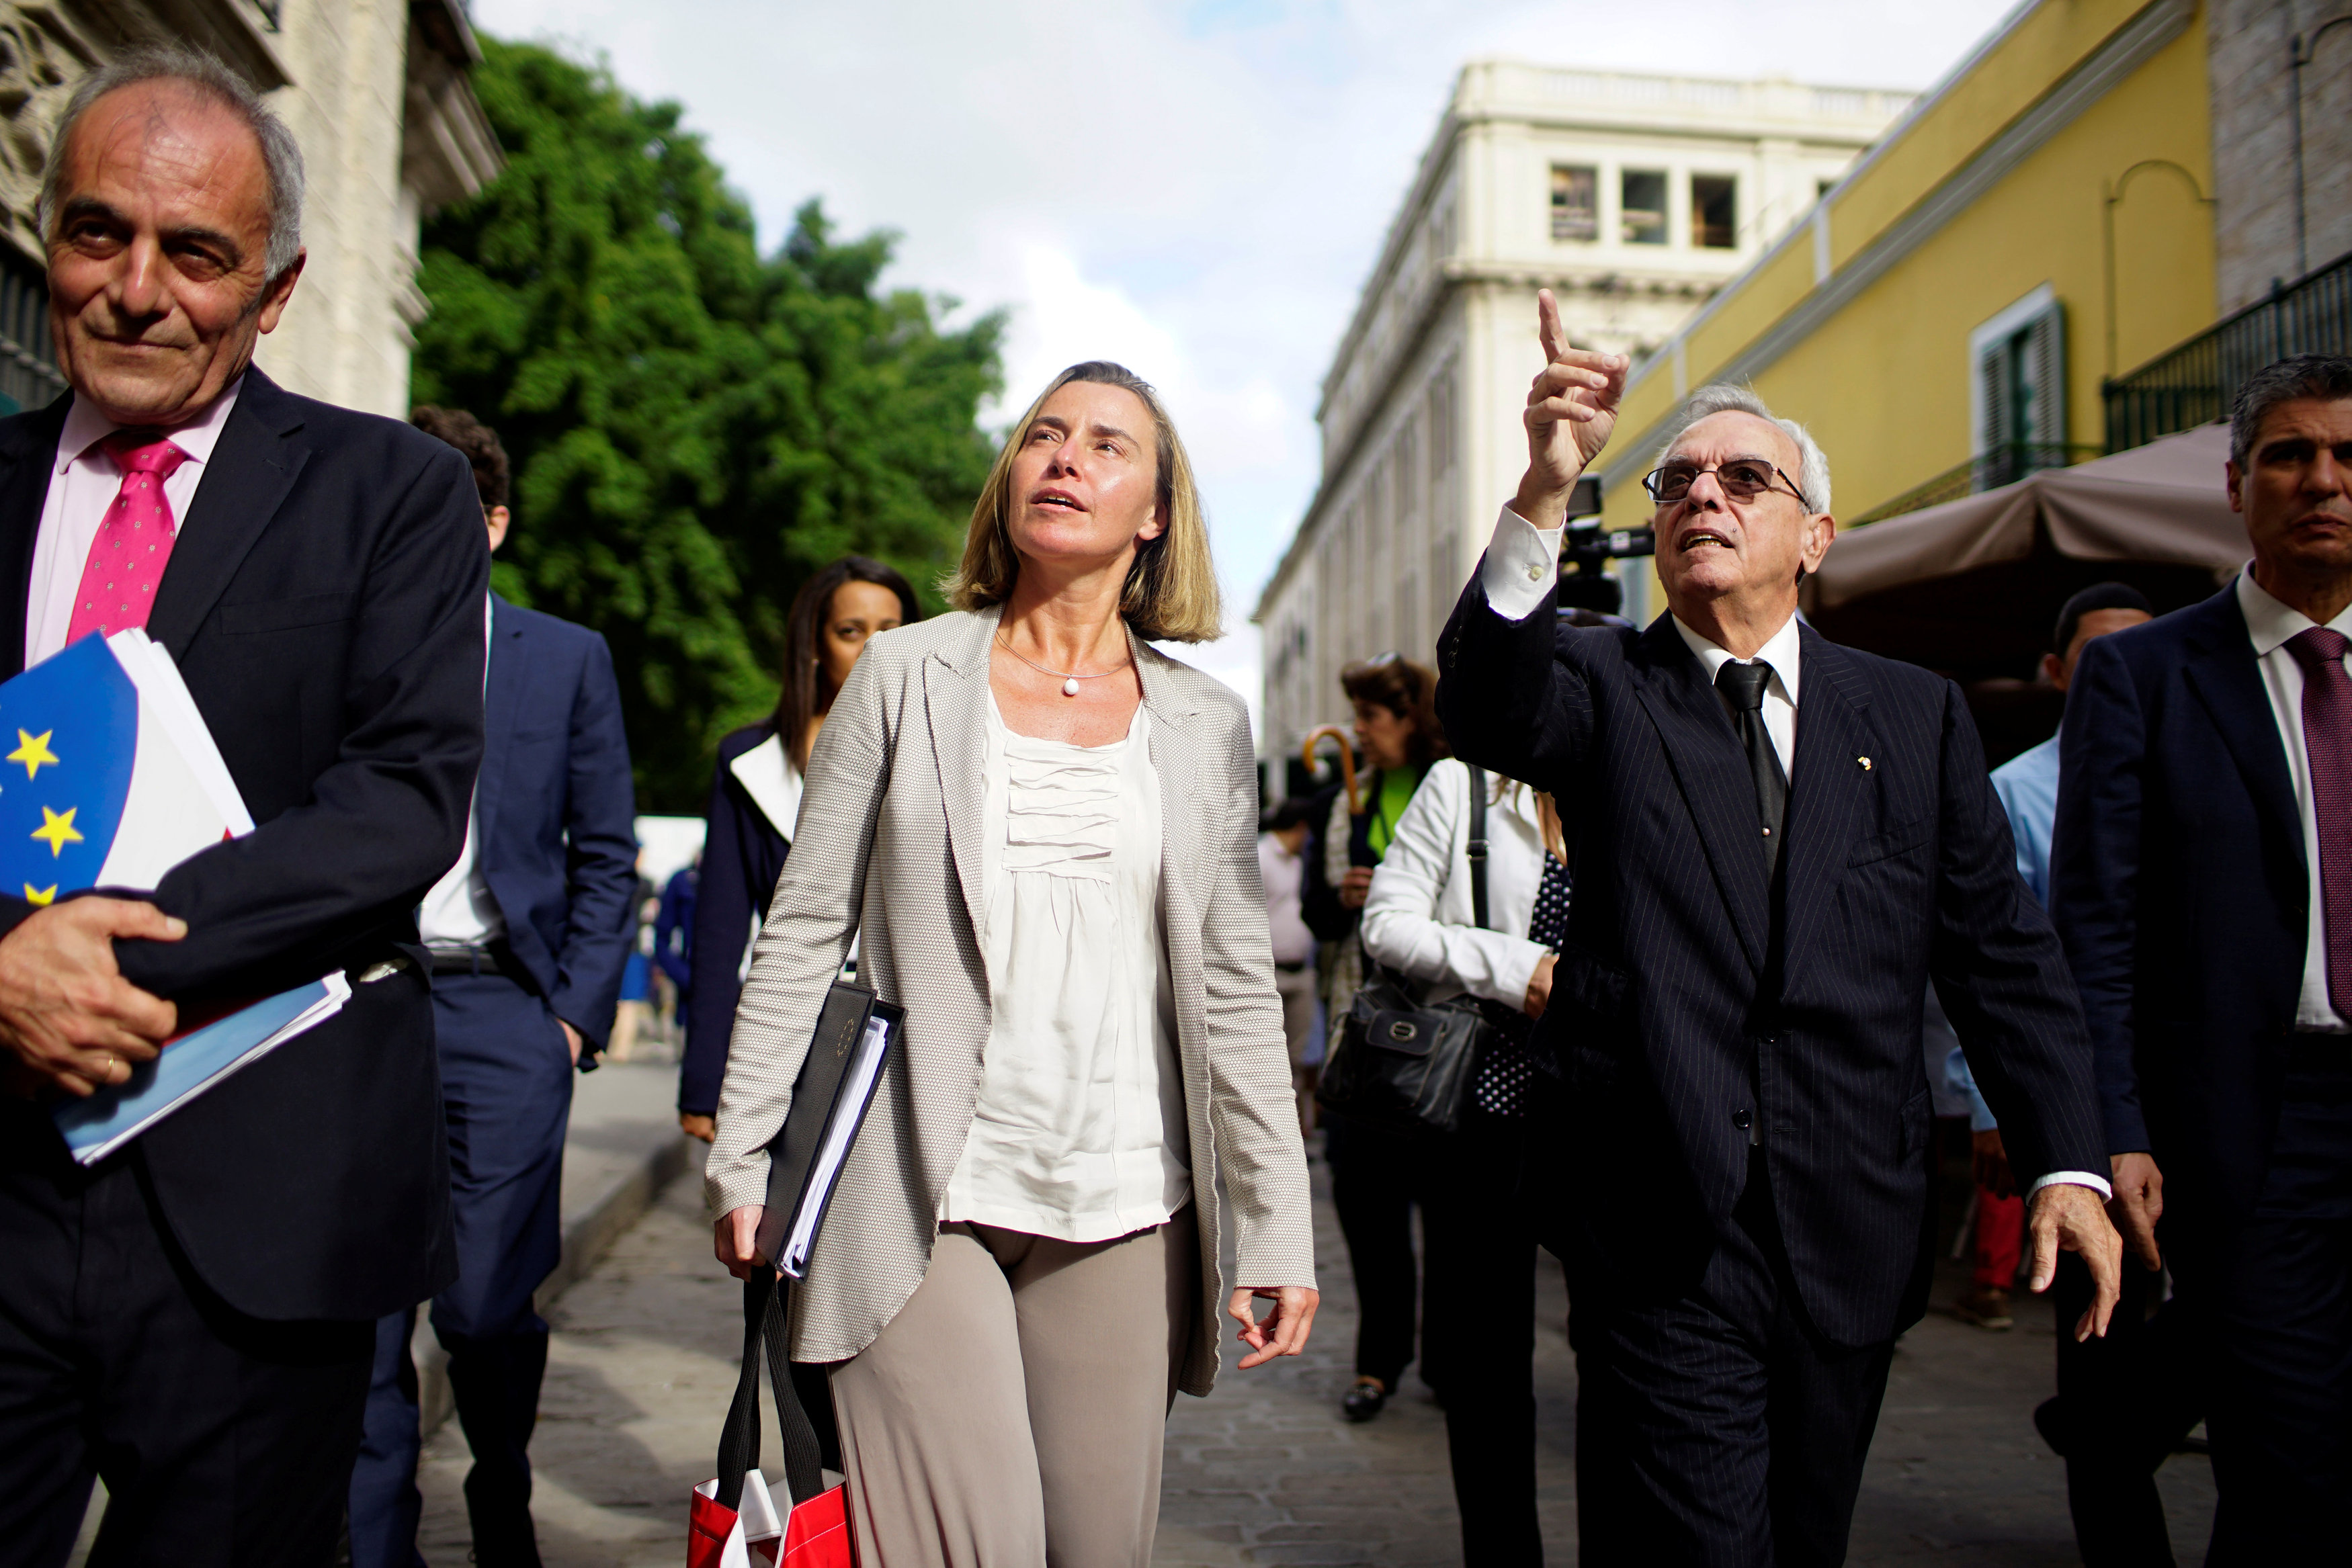 European Union’s diplomat Federica Mogherini (2nd L) speaks to Eusebio Leal (2nd R), a leading intellectual and the official historian of the city of Havana as they walk through Old Havana, Cuba, January 3, 2018.